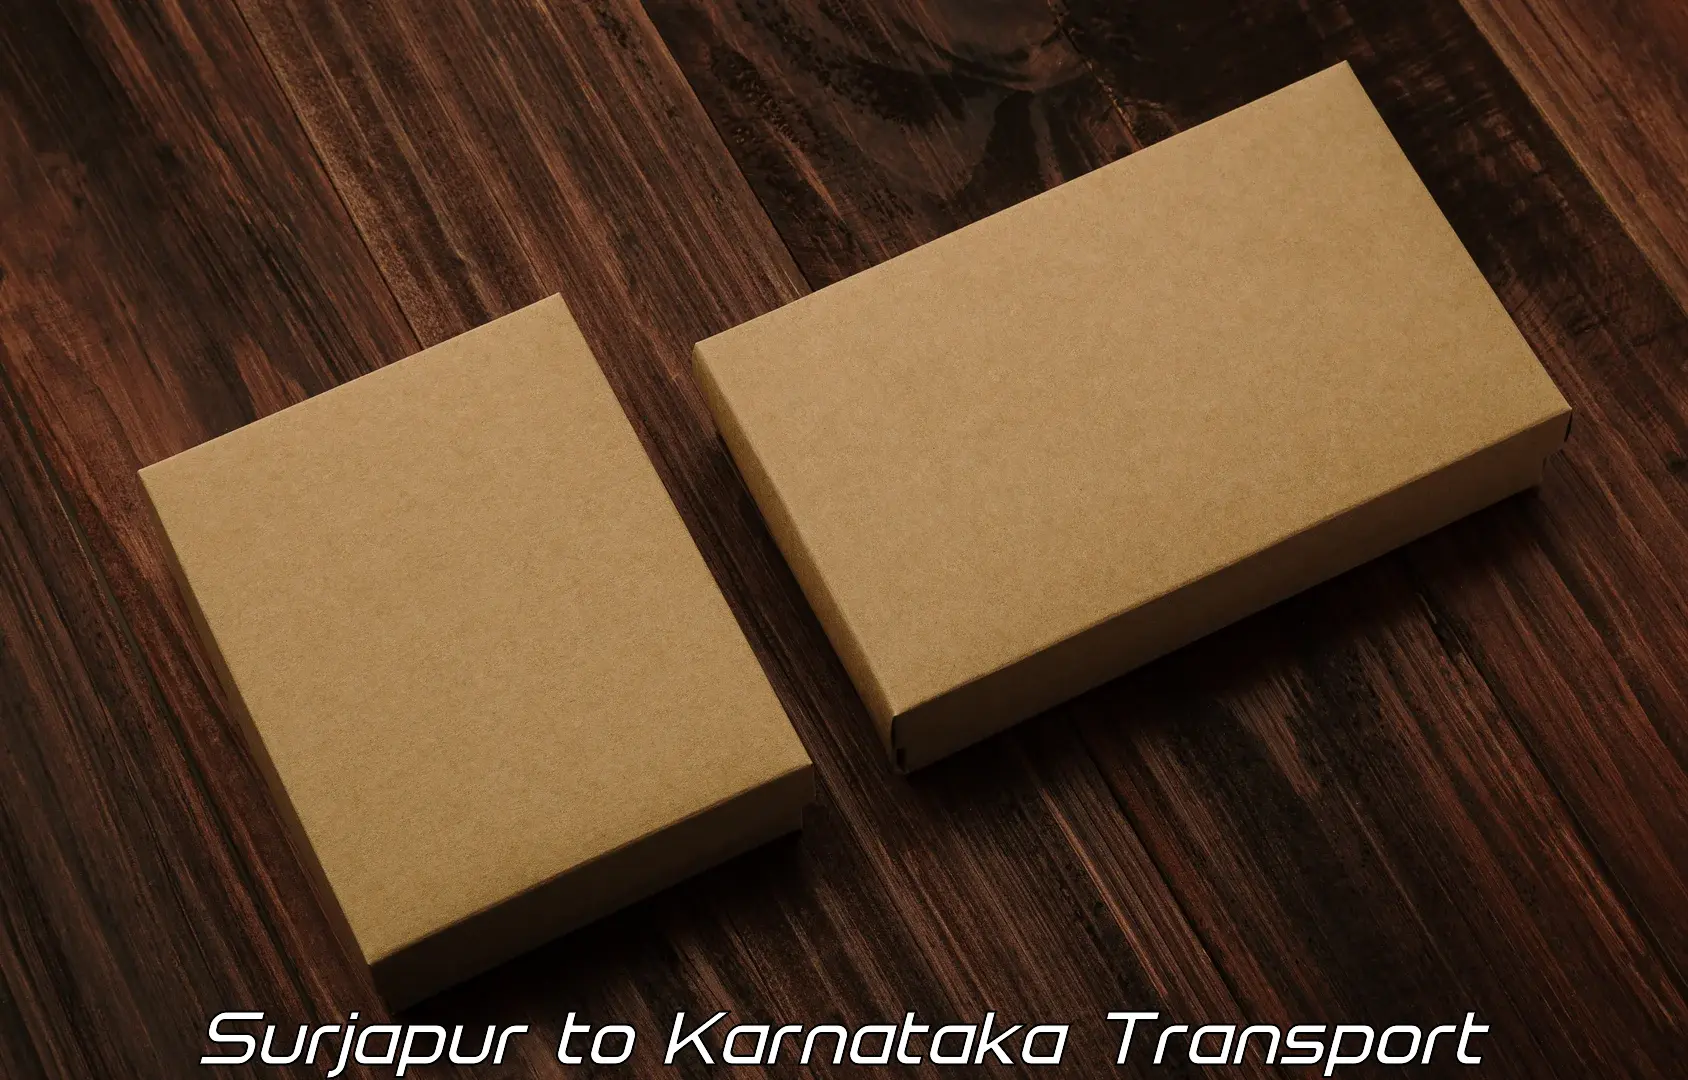 Truck transport companies in India Surjapur to Yellare